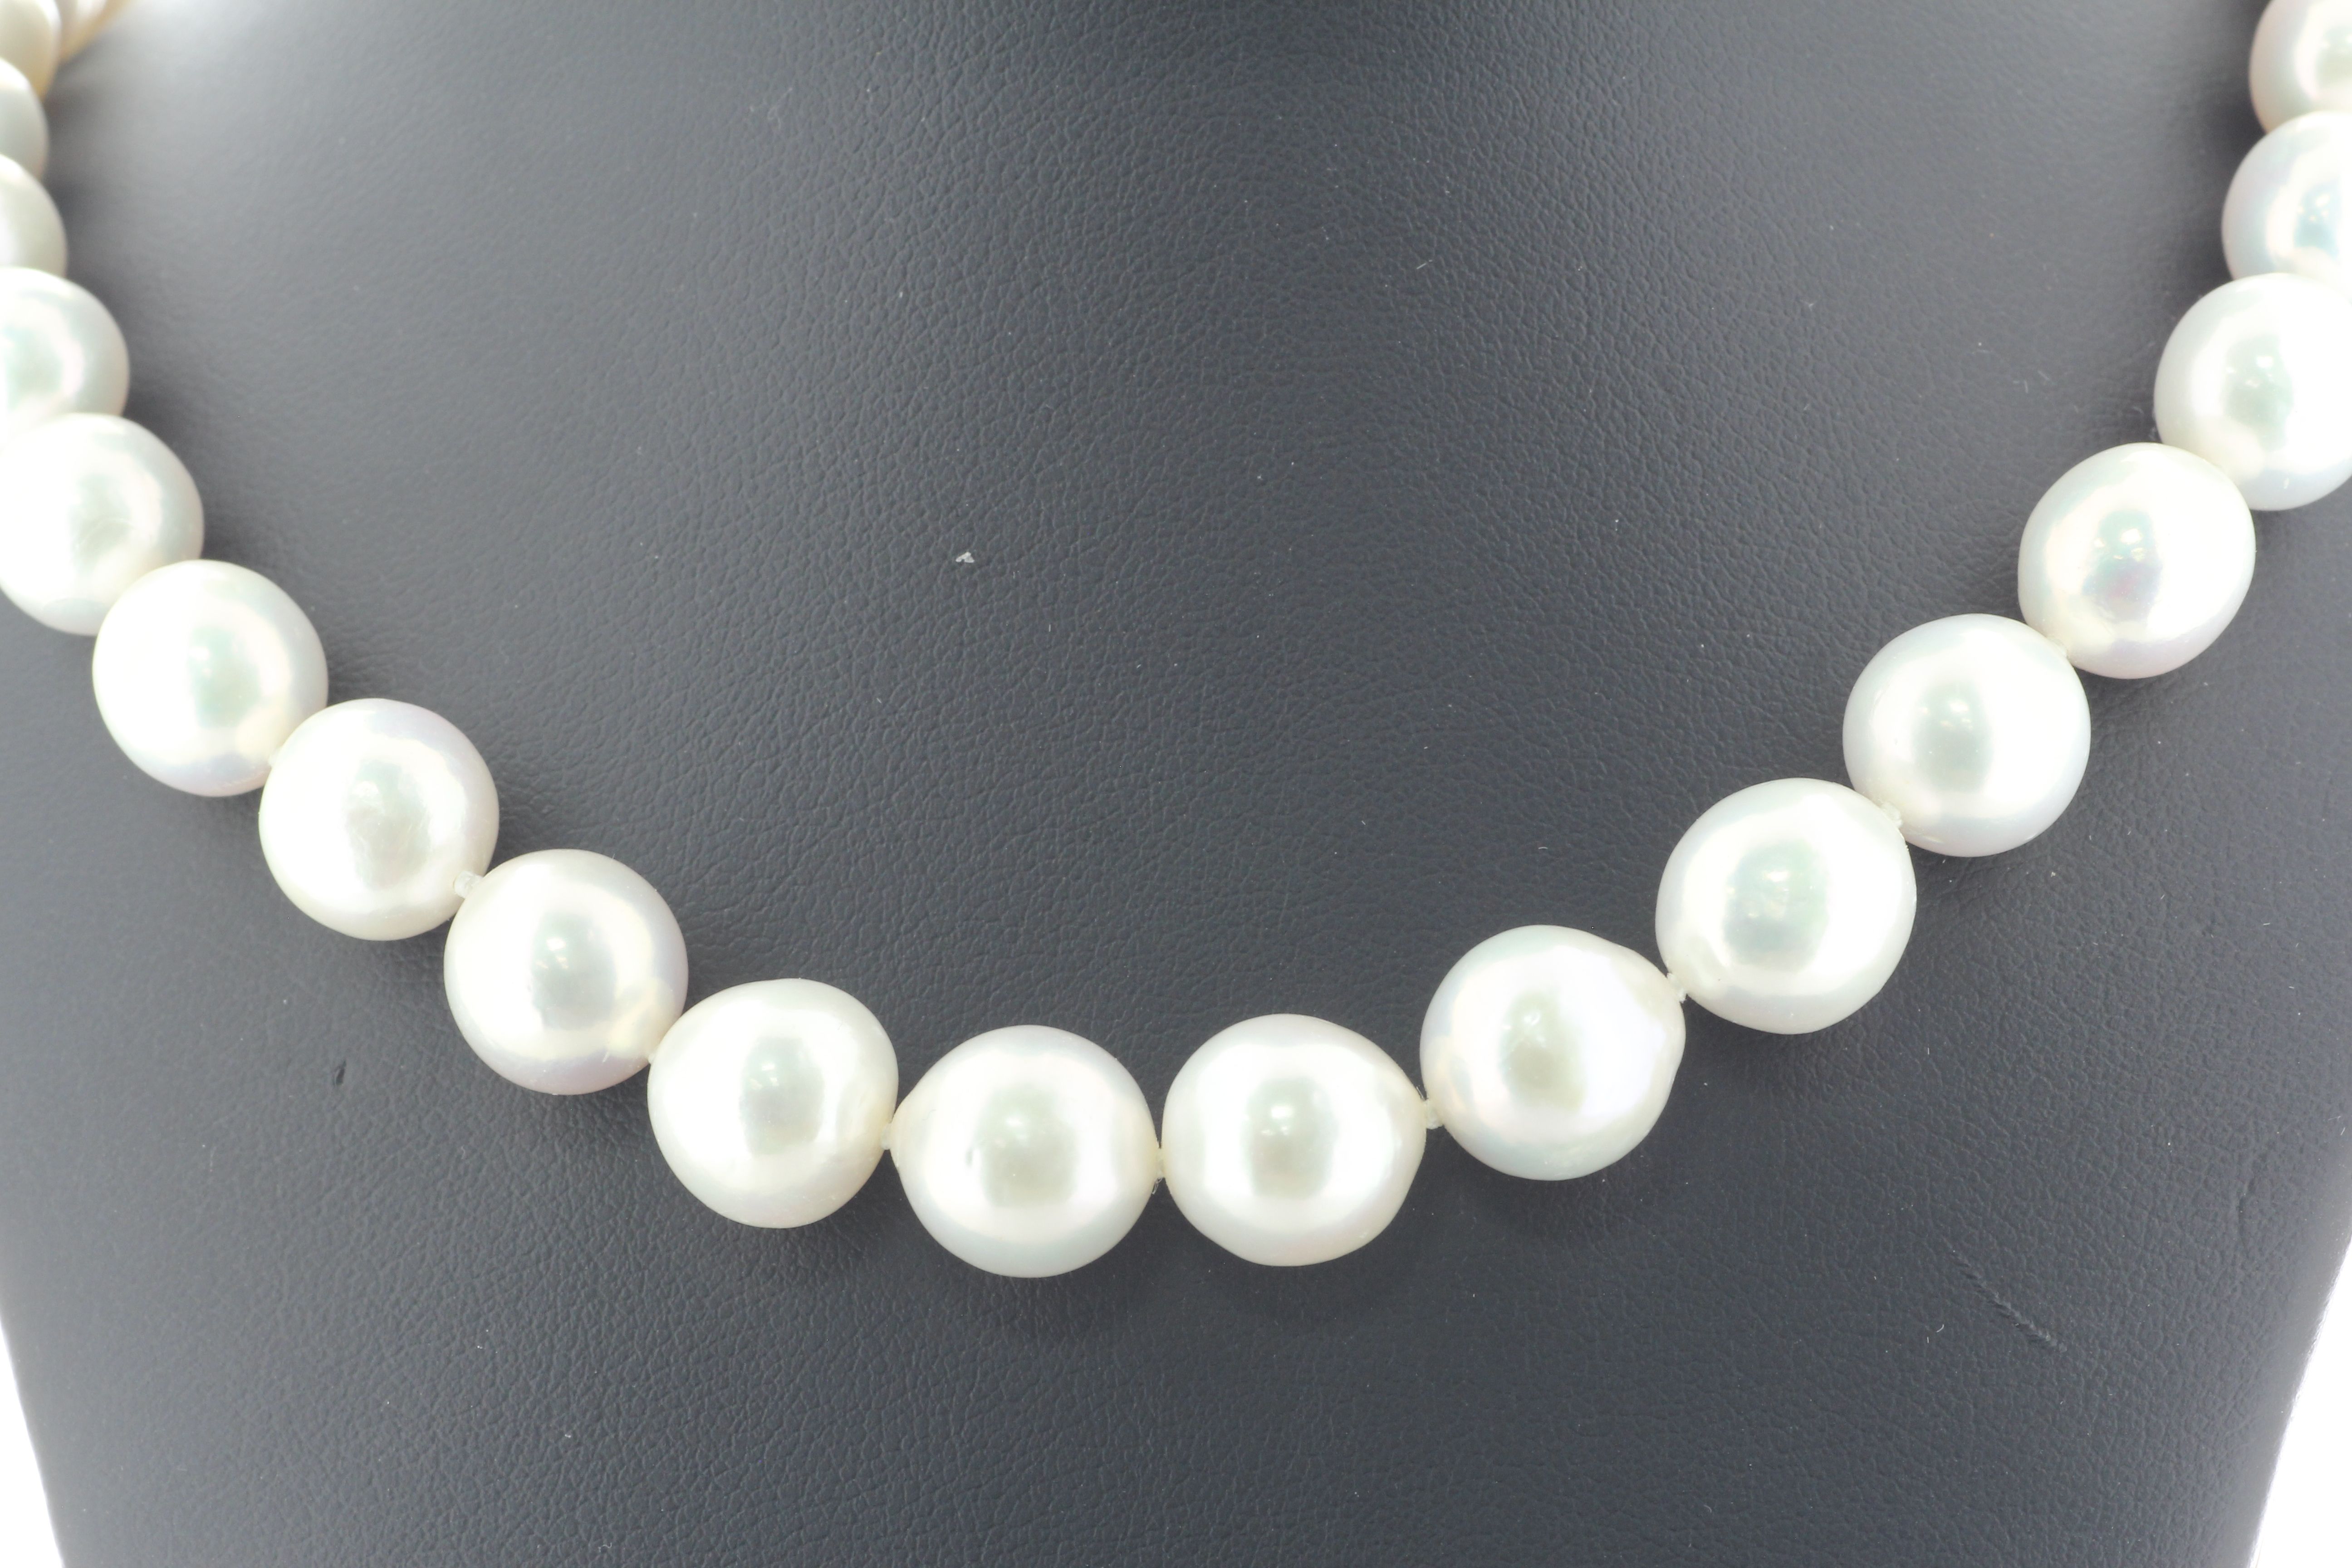 18 inch White Round 10.0 - 12.0mm Ming Pearl Necklace With 9ct Yellow Gold Clasp - Image 3 of 7